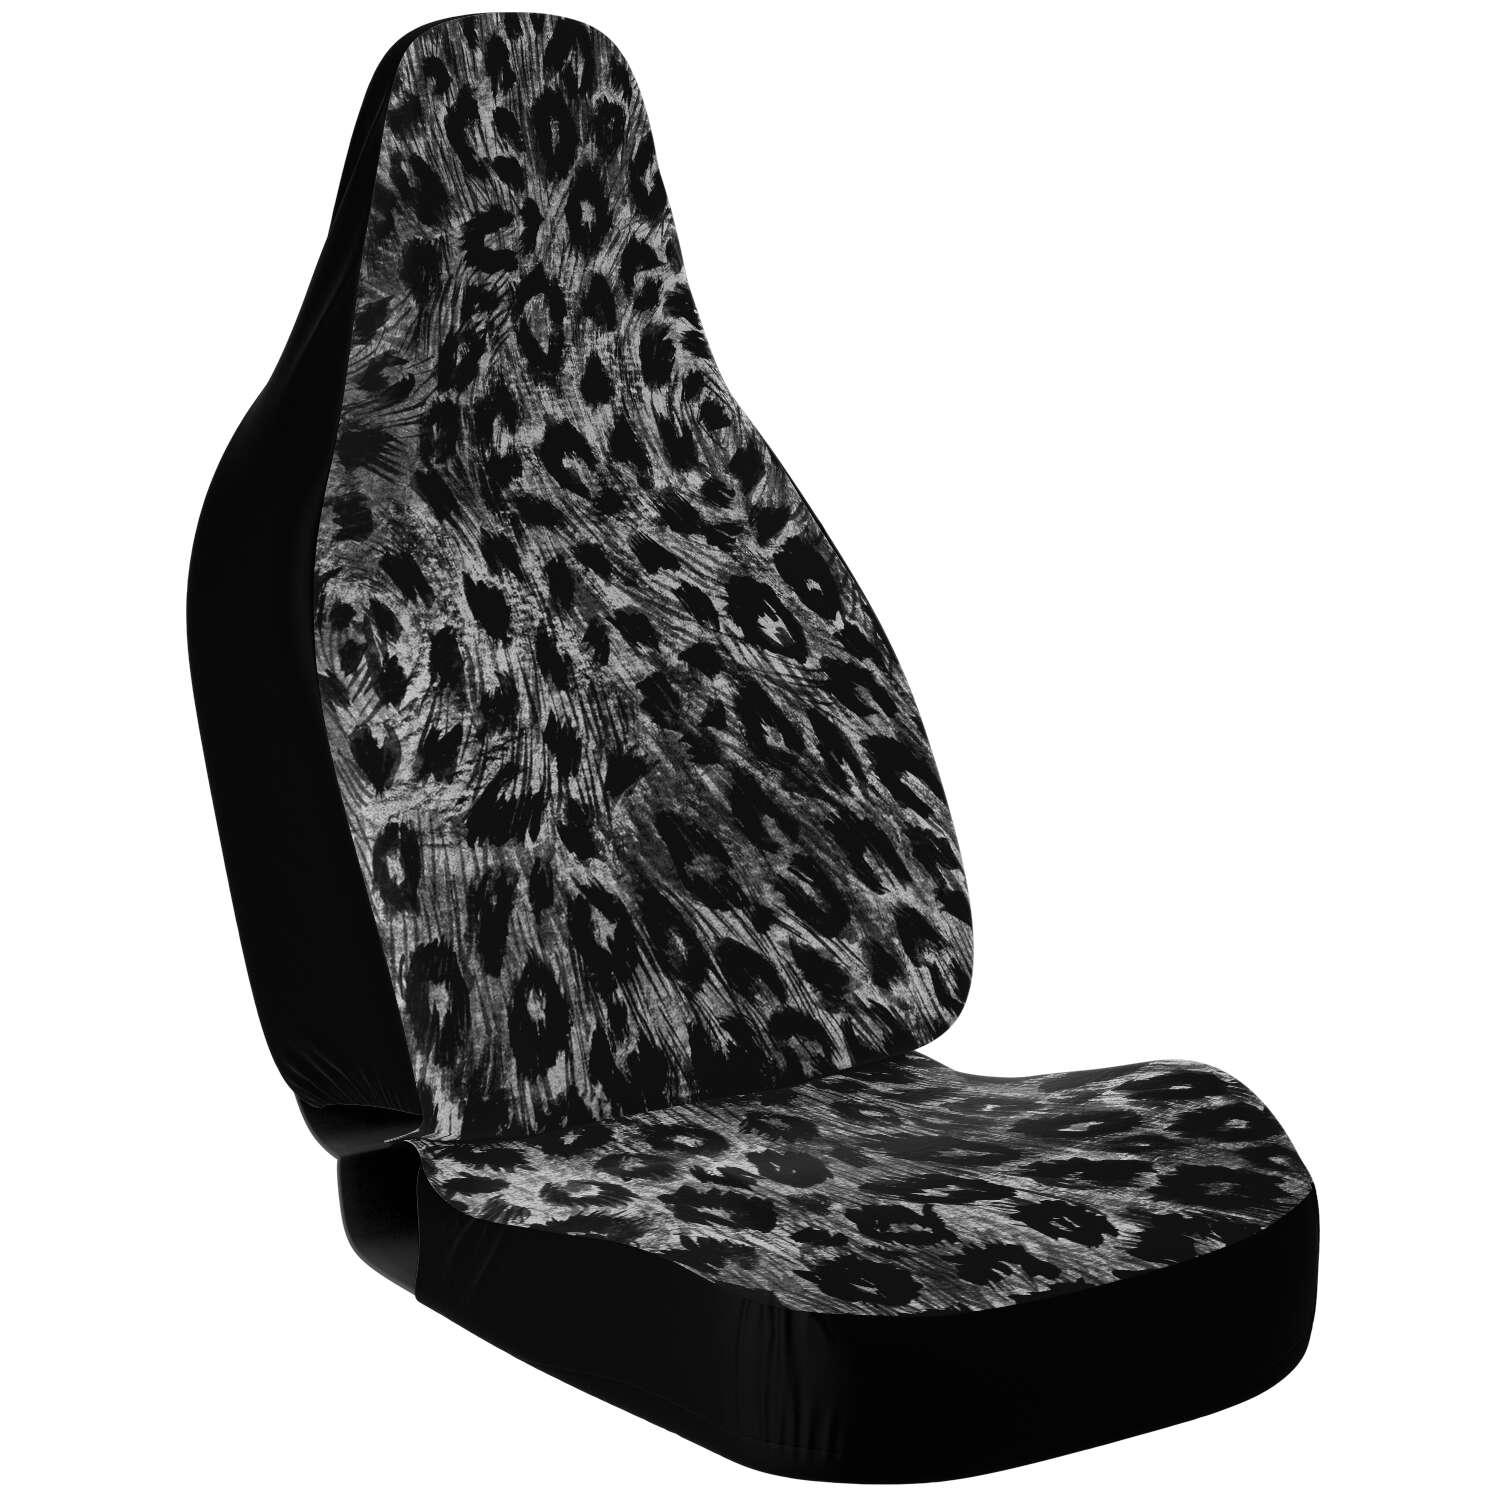 Leopard Car Seat Cover, Grey Leopard Animal Print Designer Essential Premium Quality Best Machine Washable Microfiber Luxury Car Seat Cover - 2 Pack For Your Car Seat Protection, Cart Seat Protectors, Car Seat Accessories, Pair of 2 Front Seat Covers, Custom Seat Covers